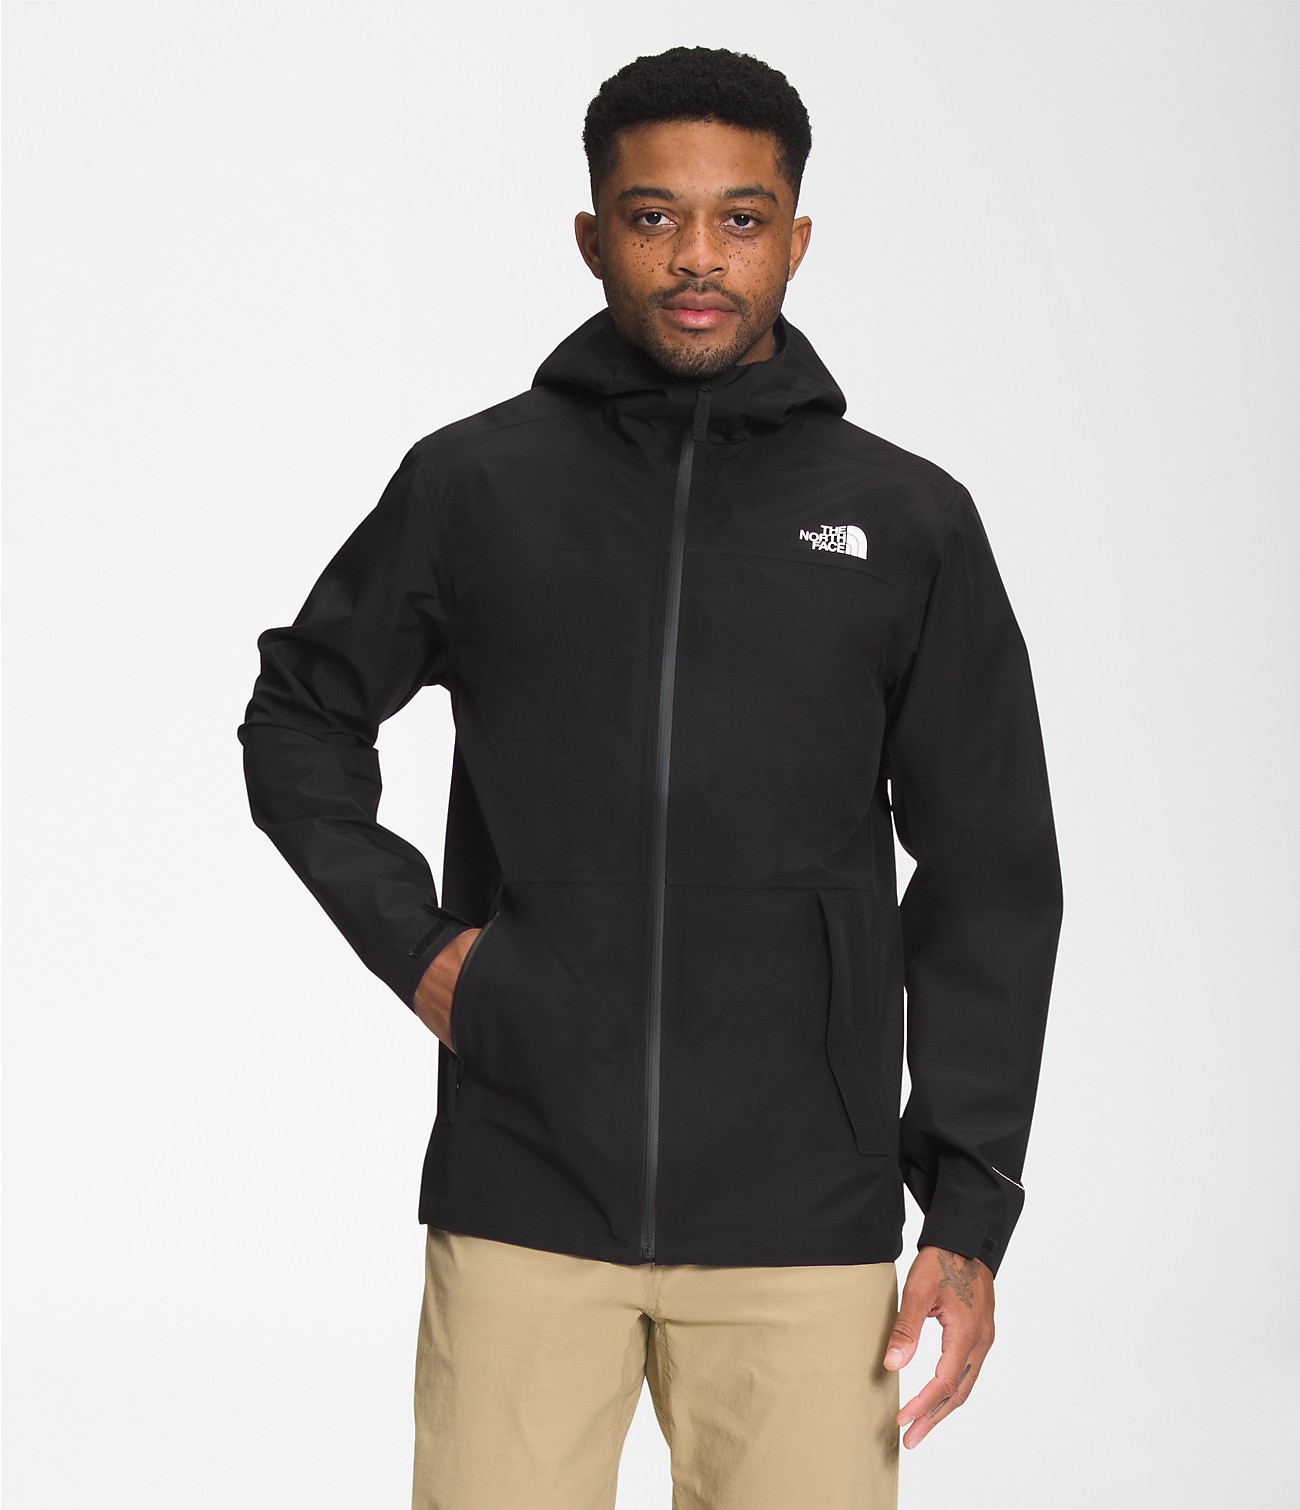 Unlock Wilderness' choice in the Canada Goose Vs North Face comparison, the Dryzzle FUTURELIGHT™ Jacket by The North Face